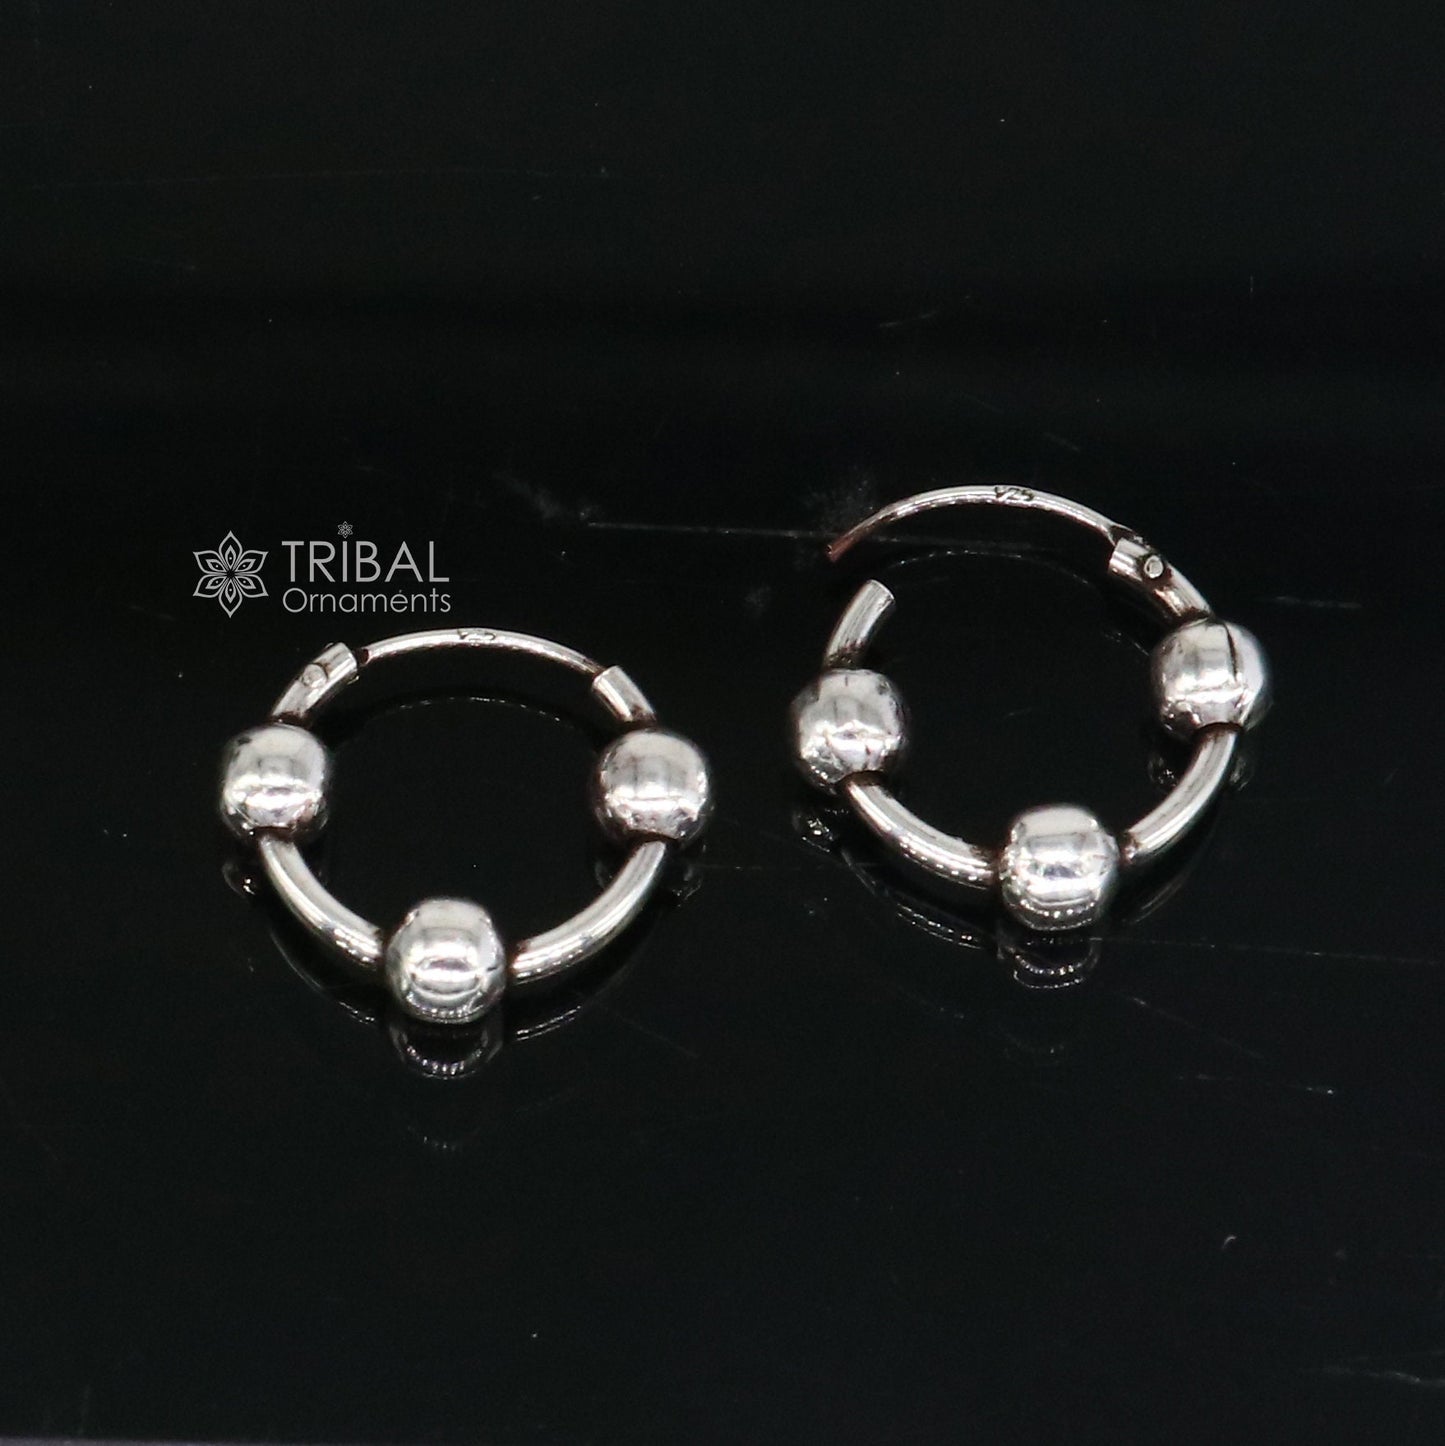 Exclusive new fancy stylish small  925 sterling silver handmade hoops earrings bali ,pretty gifting bali tribal jewelry india s1216 - TRIBAL ORNAMENTS